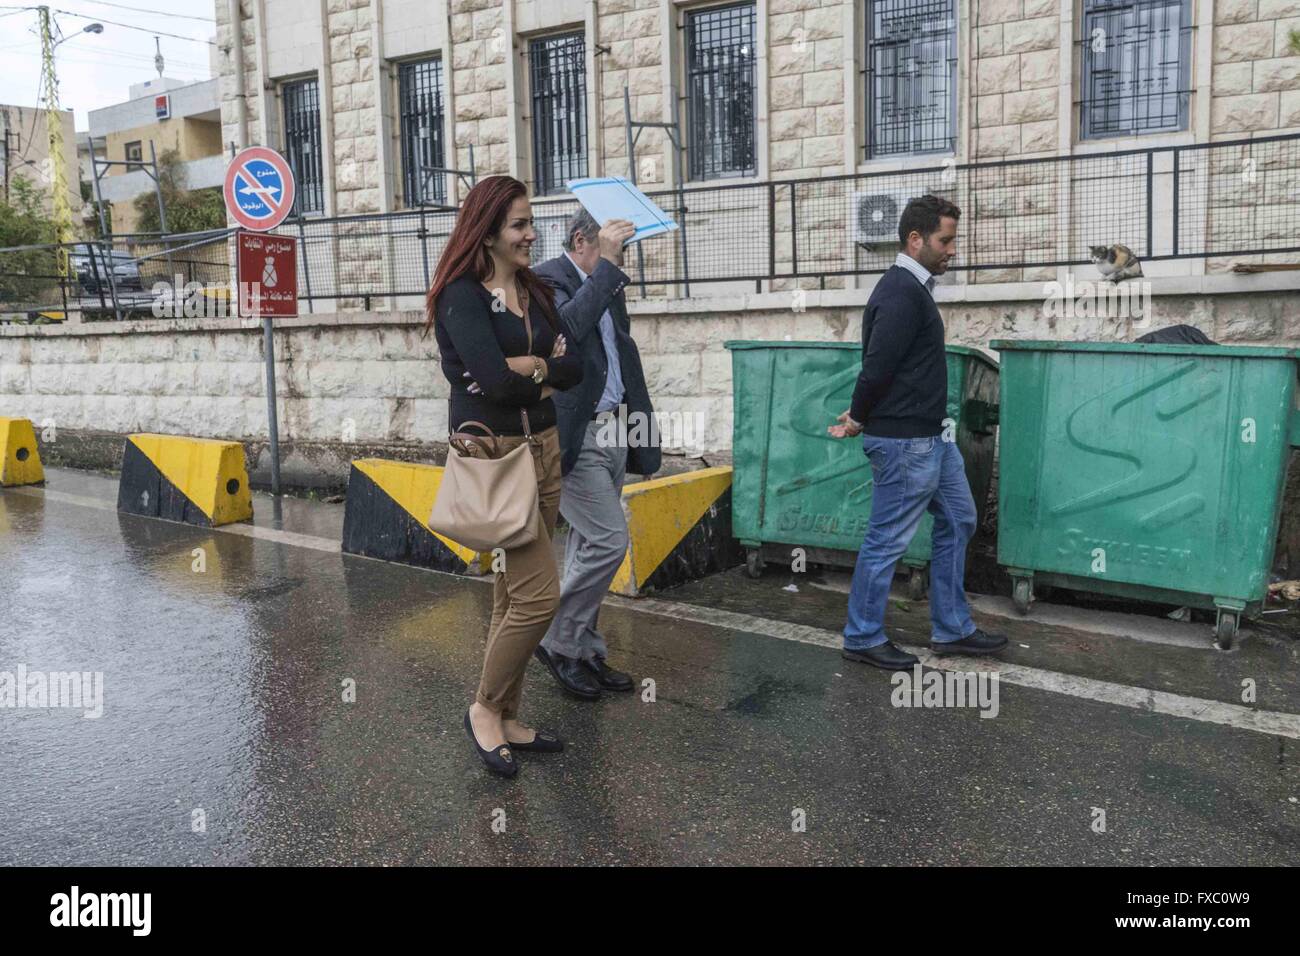 Beirut, Lebanon. 13th Apr, 2016. Apr 13, 2016 - Beirut, Lebanon - Courthouse where Sally Faulkner of Brisbane, Australia, and members of the Australian TV show '60 Minutes', a Nine Network production, are being held after abducting her two children from the custody of her estranged husband, Ali Zeid al-Amin, a surfing instructor who lives south of the Lebanese capital, Beirut. Tara Brown, the presenter famous from 60 Minutes, reporter Stephen Rice, cameraman Ben Williamson and sound recordist David Ballment were arrested while in Beirut to cover the story of Brisbane mother Sally Faulkner, Stock Photo